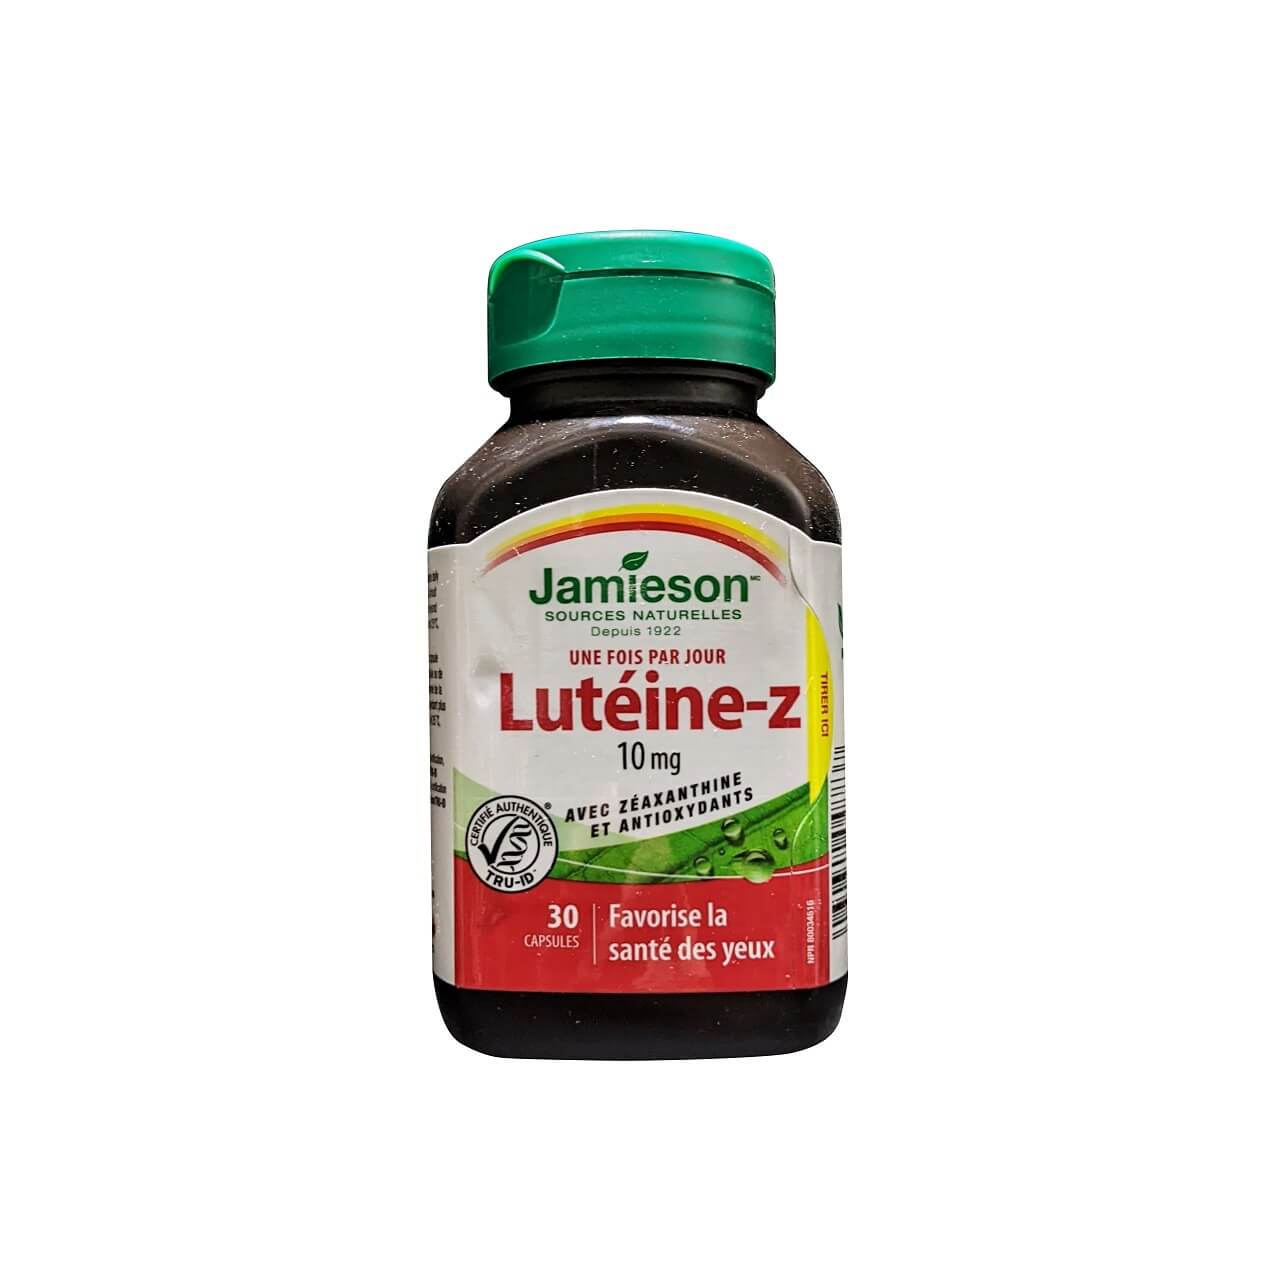 Product label for Jamieson Once Daily Lutein-Z 10 mg with Zeaxanthin and Antioxidants (30 capsules) in French